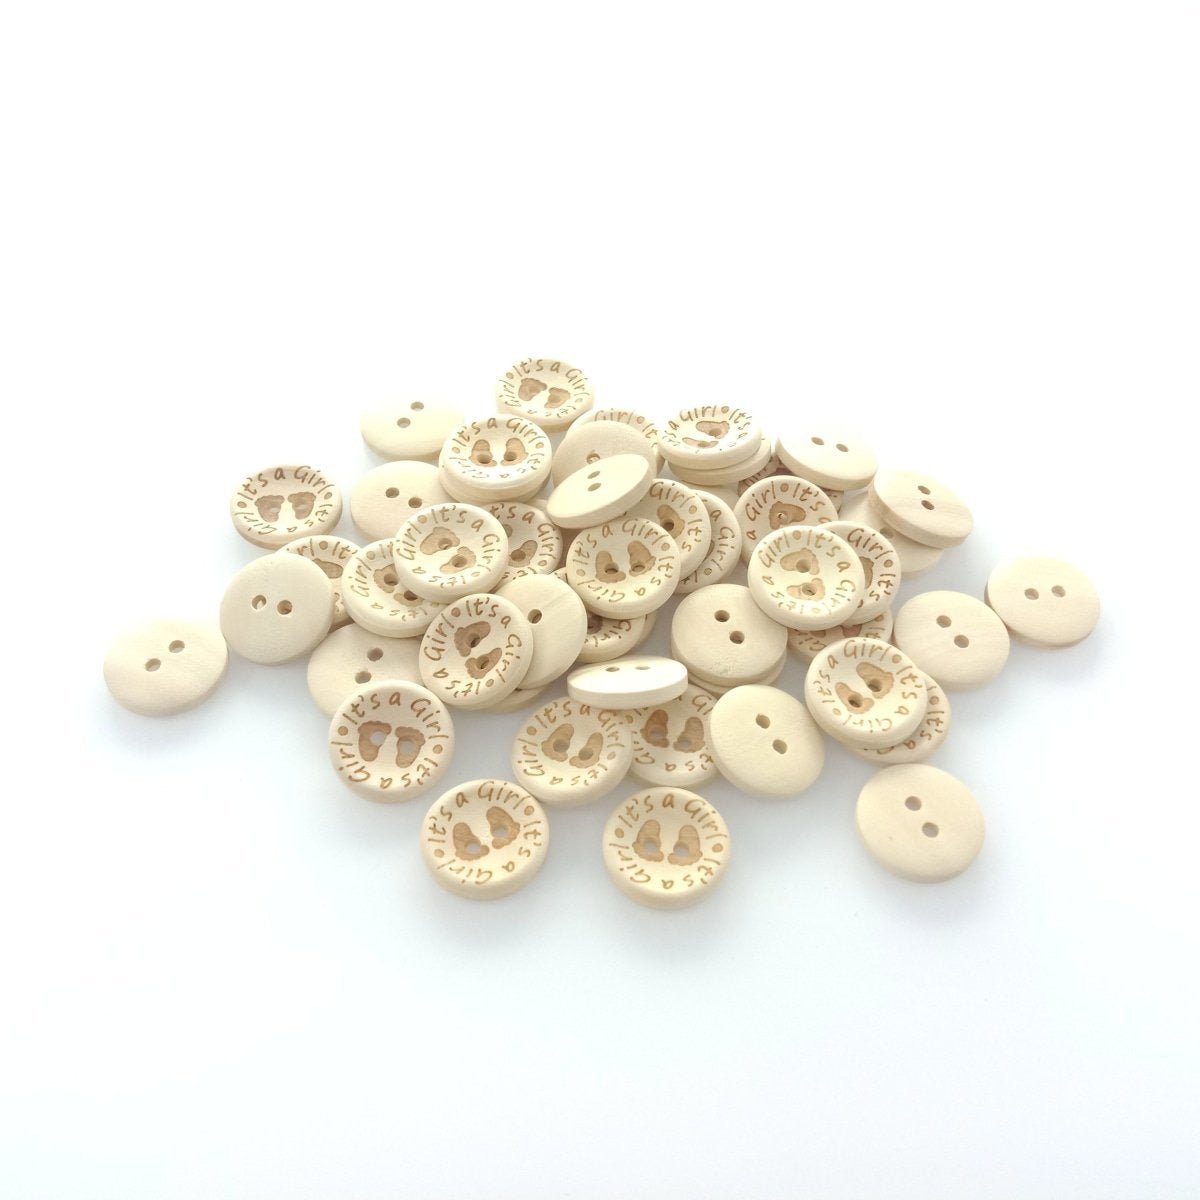 15/20/25mm It's a Girl/Boy Wooden Button Natural Wood Sewing Baby Clothing Buttons - It's a Boy 15mm 50pcs - Asia Sell